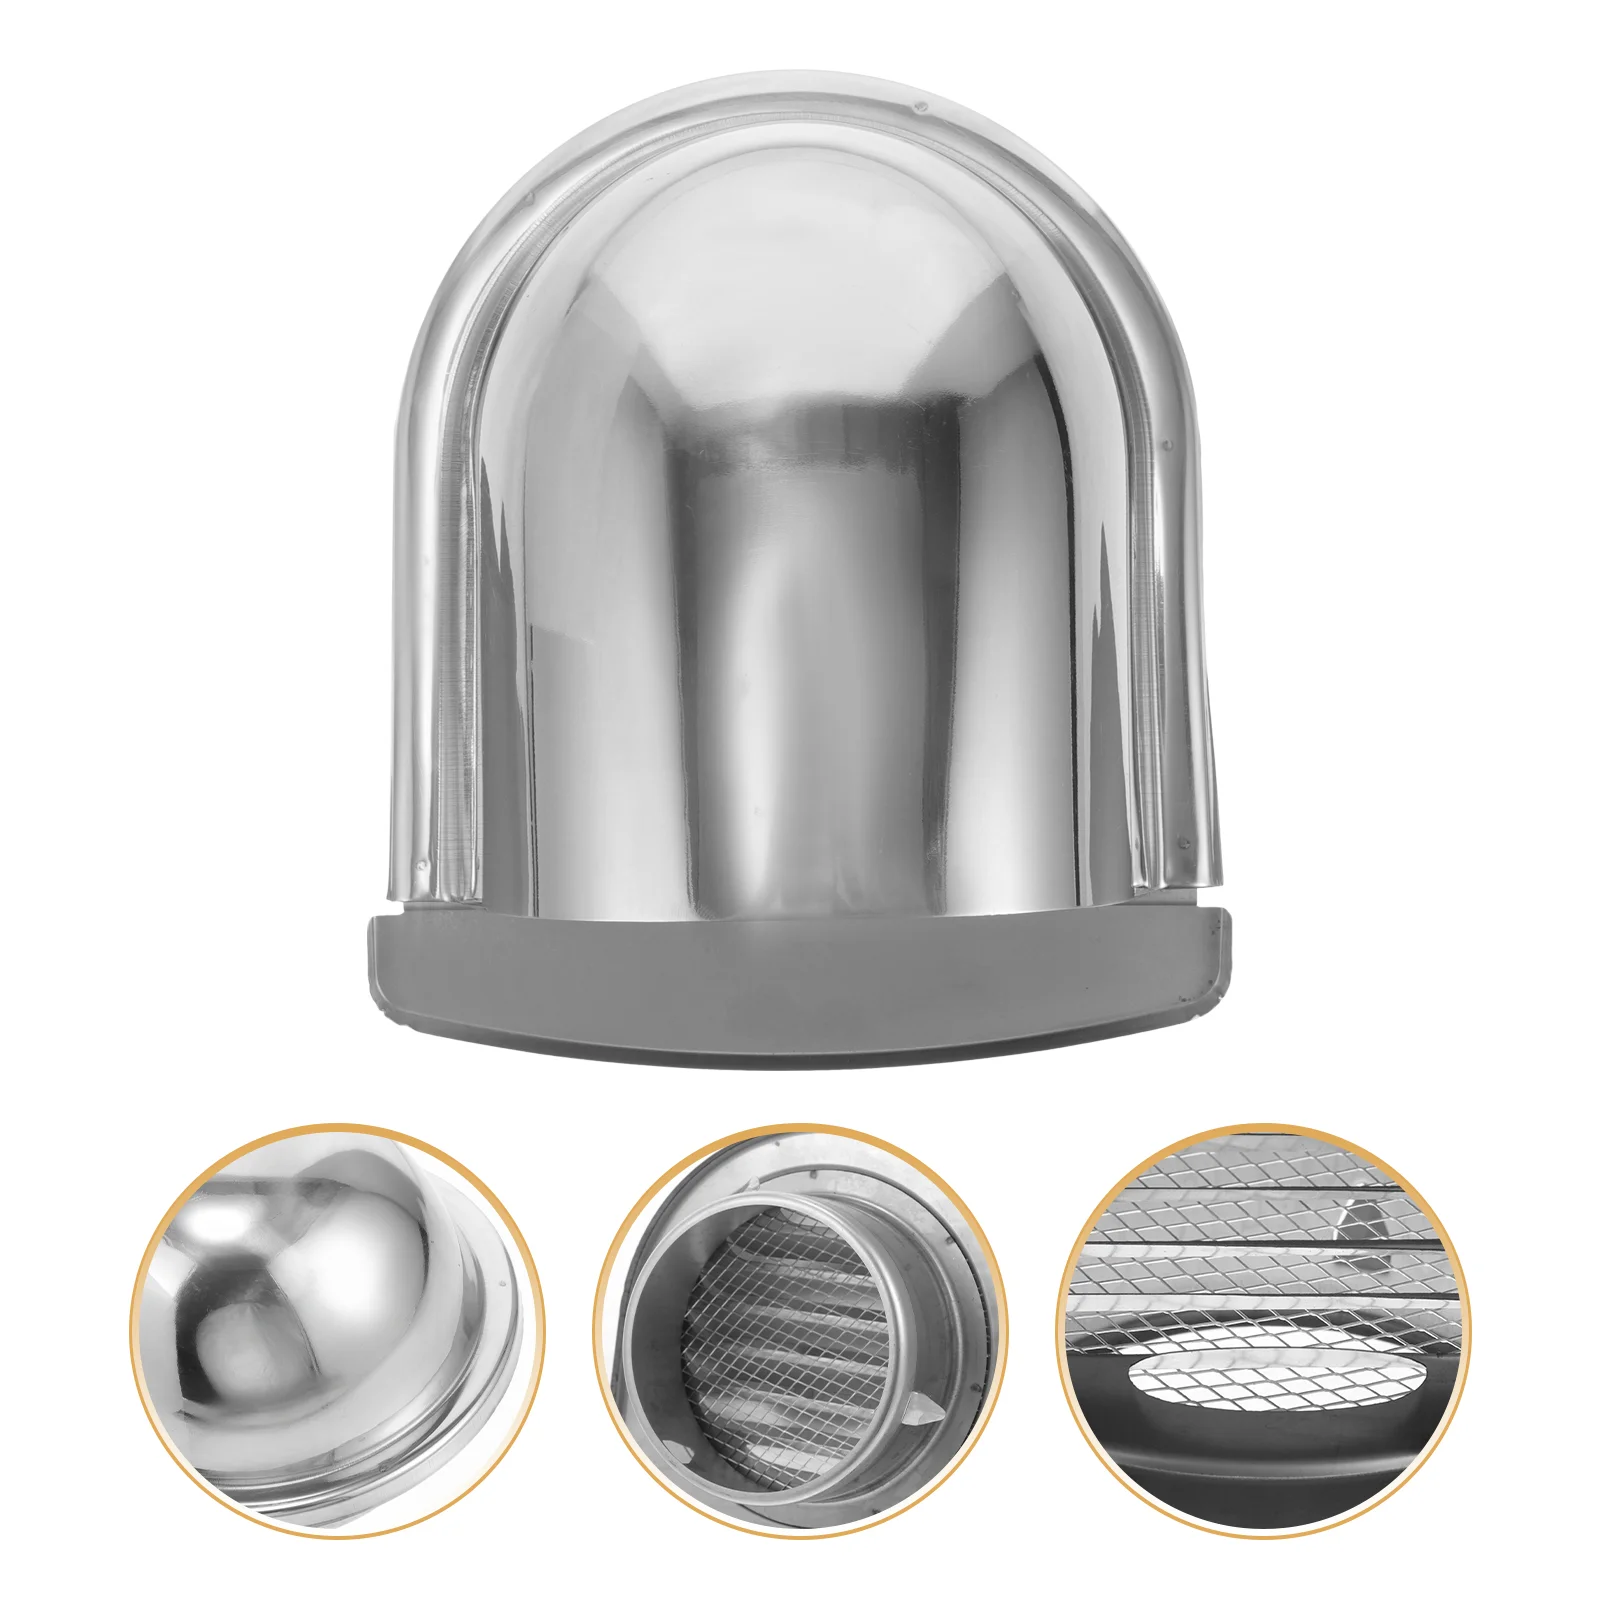 

Roof Rain Hat Funnel Protector Vent Cap Chimney Rainproof Cover Fireplace Smokestack Round Caps